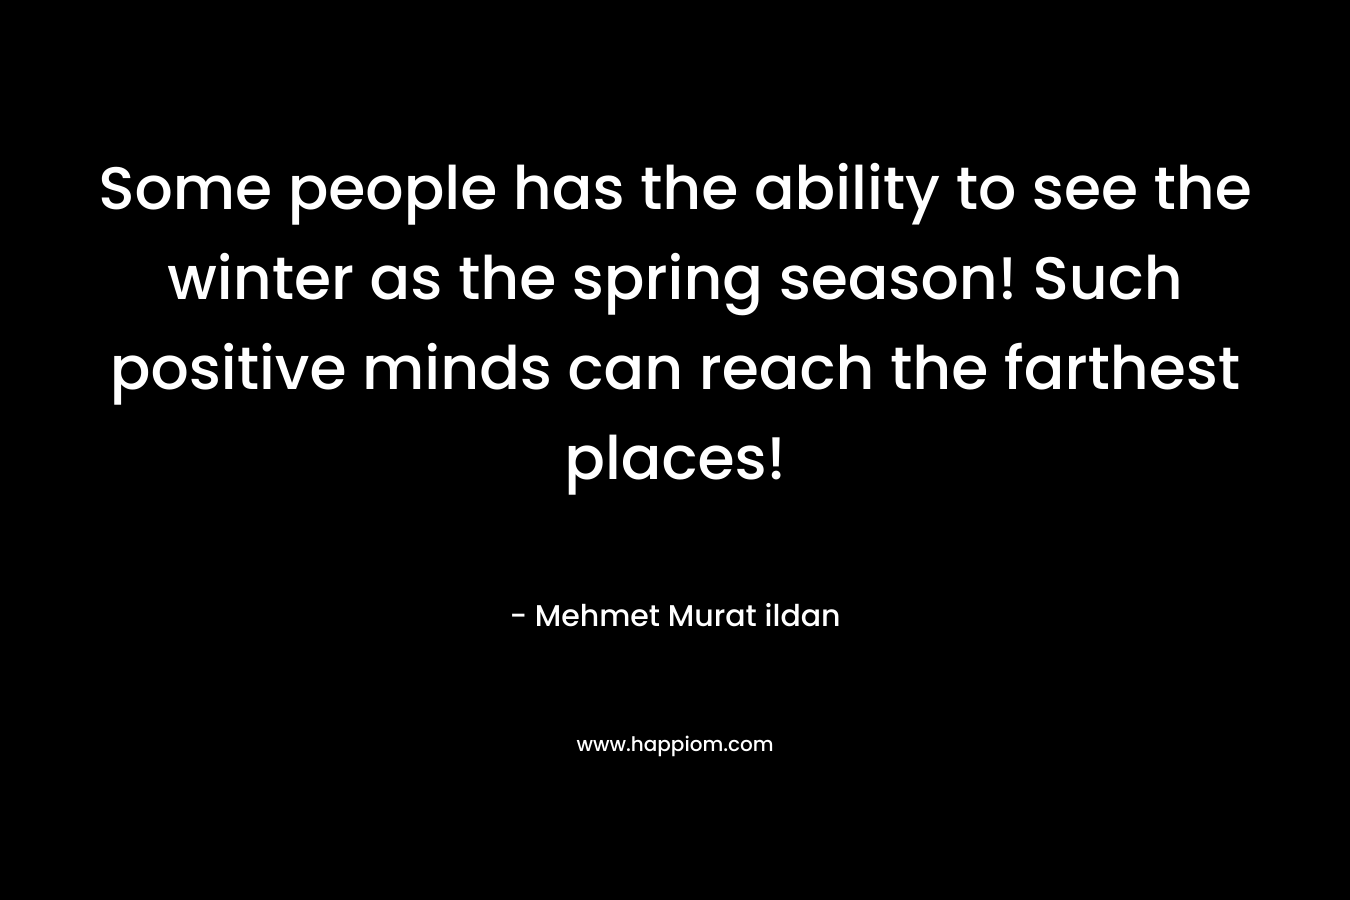 Some people has the ability to see the winter as the spring season! Such positive minds can reach the farthest places!